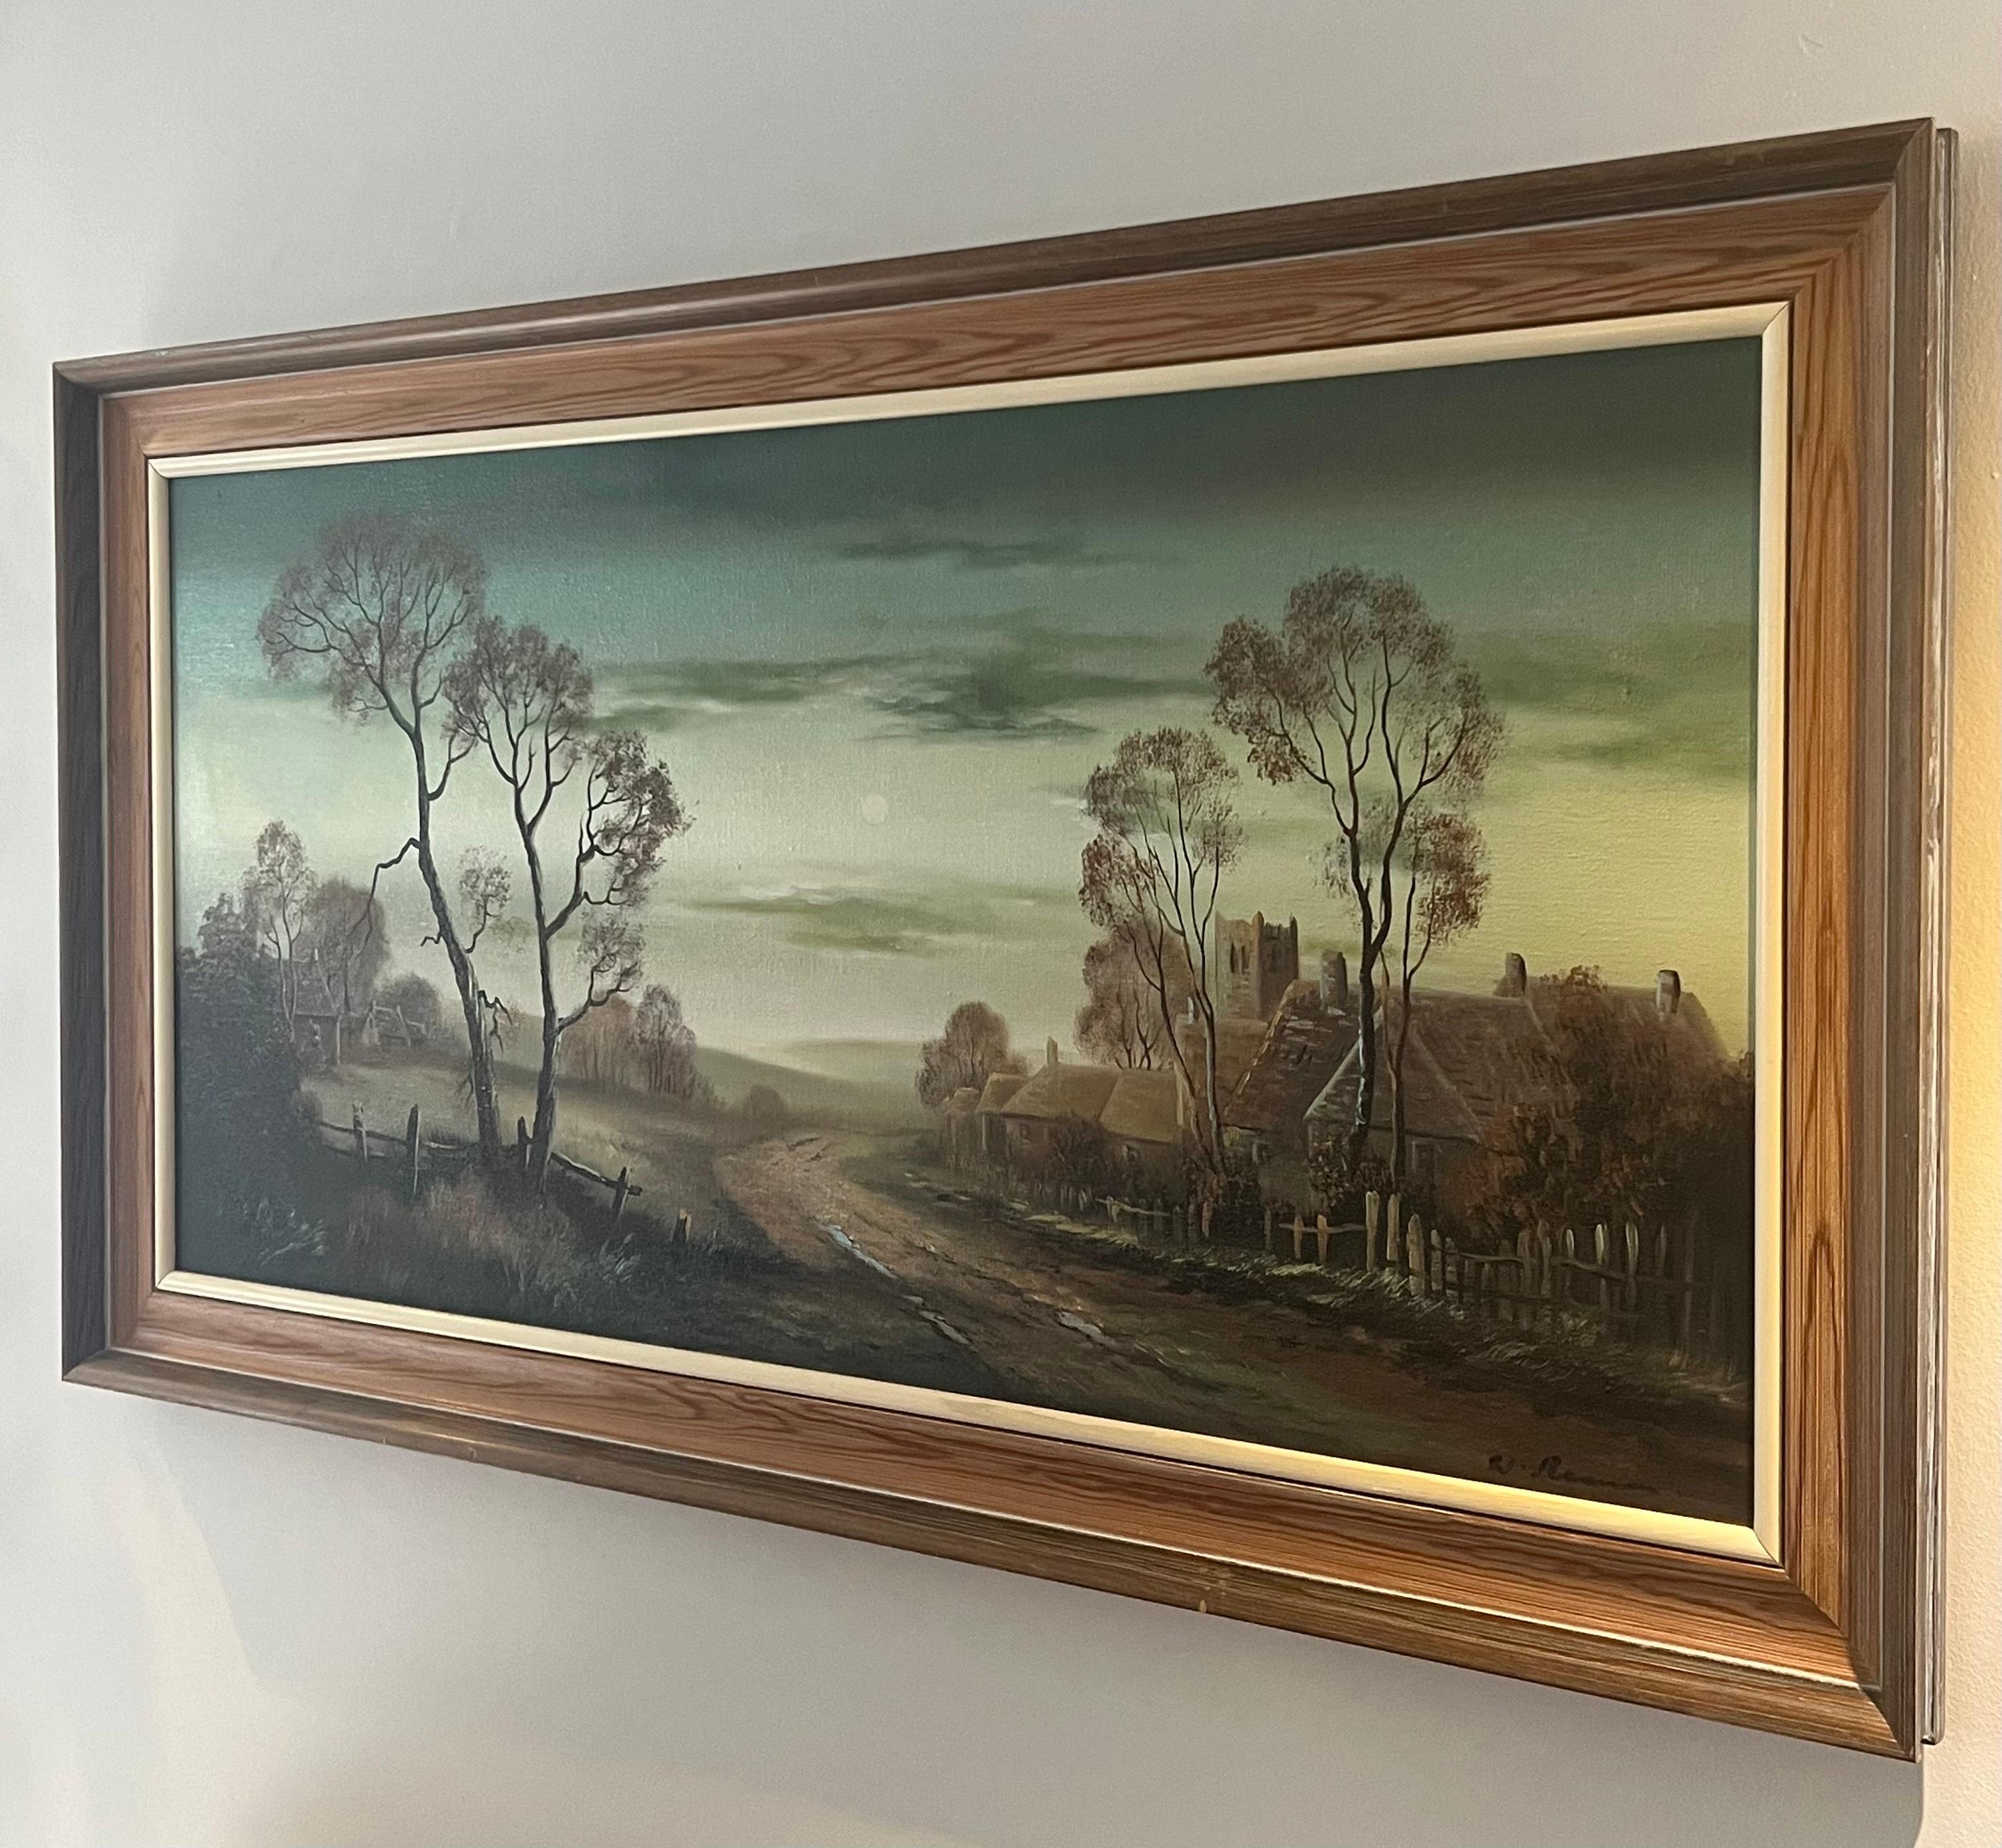 Winter Trees at Moonlight at a Village in the English Countryside by 20th Century British Artist, Wendy Reeves

Art measures 40 x 20 inches
Frame measures 46 x 26 inches (framed in a vintage natural oak moulding with cream insert) 

Wendy Reeves